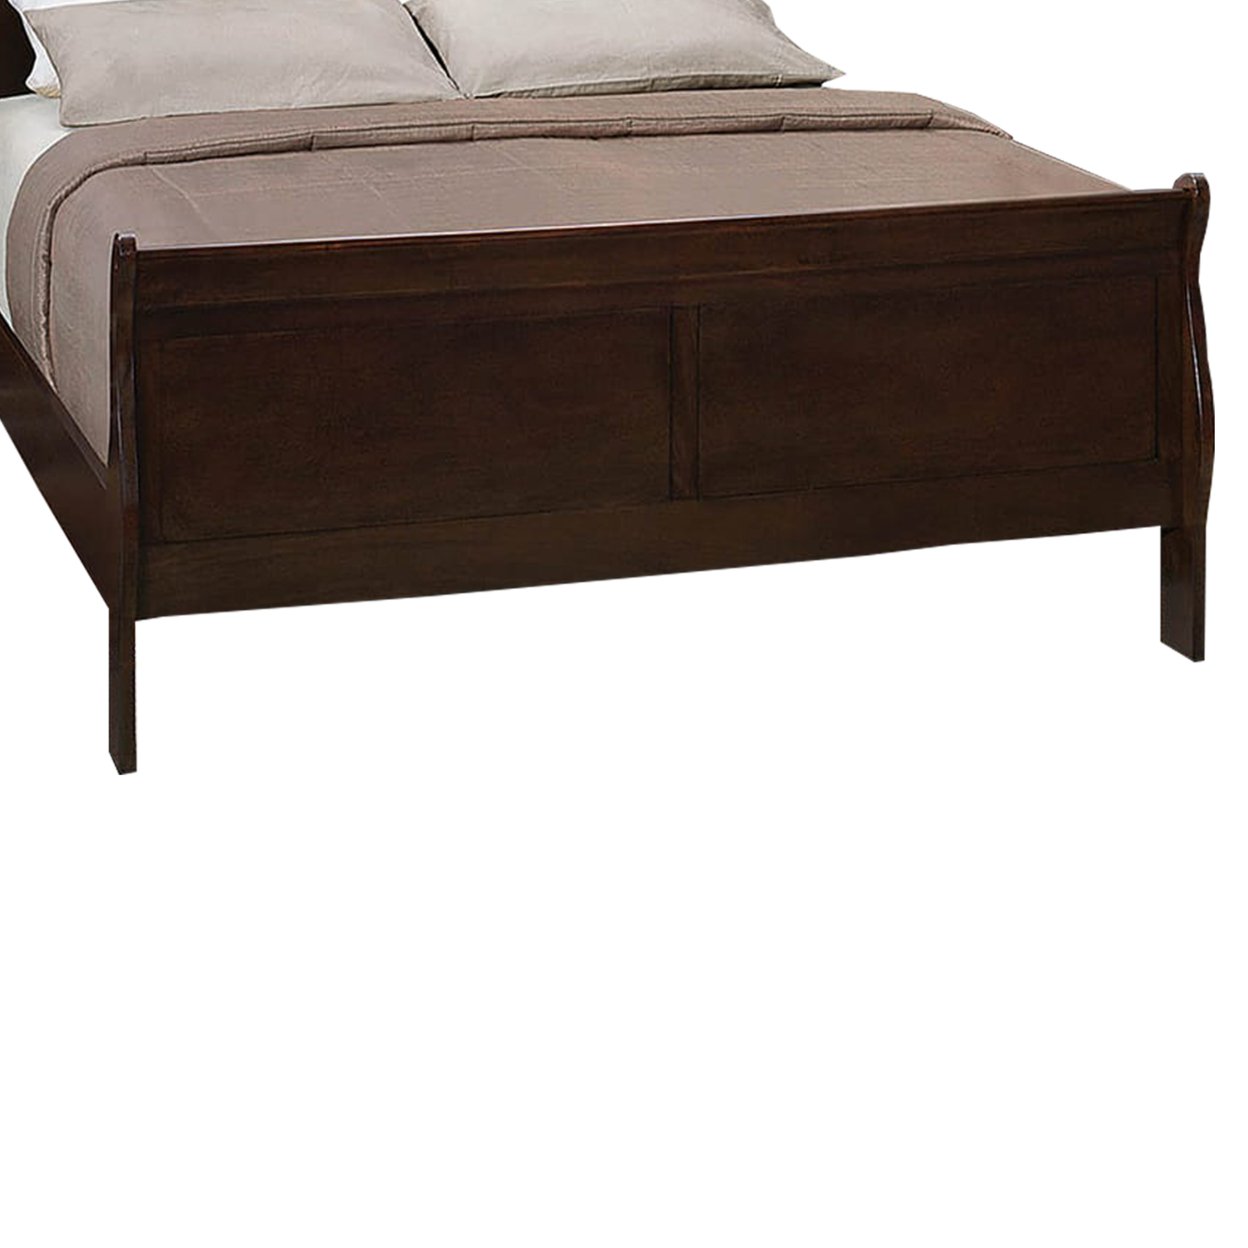 Wooden Eastern King Bed With Curved Panel Headboard, Brown- Saltoro Sherpi